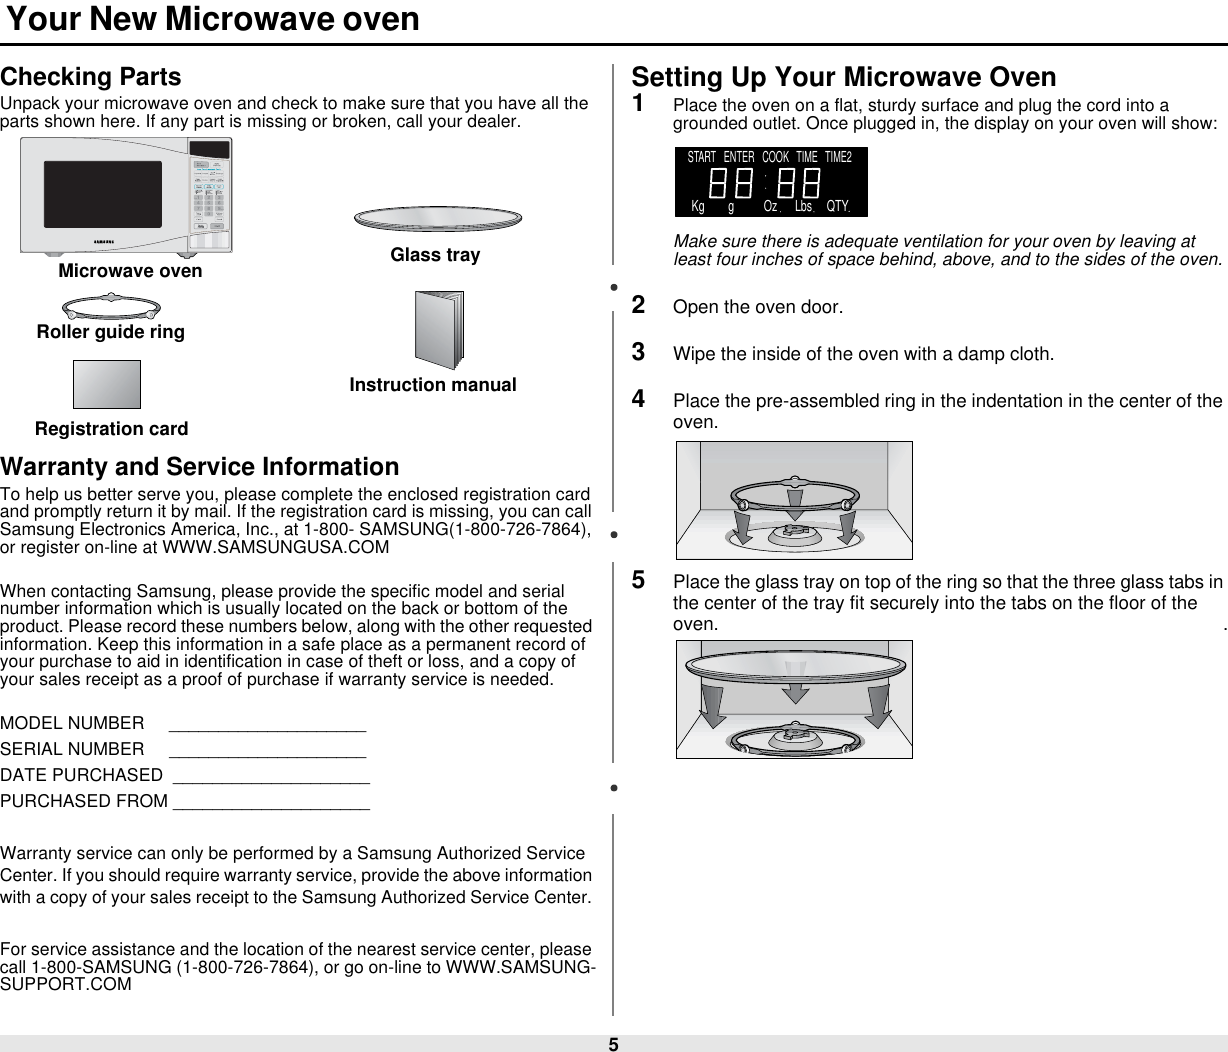 5 Your New Microwave ovenChecking PartsUnpack your microwave oven and check to make sure that you have all the parts shown here. If any part is missing or broken, call your dealer.Warranty and Service InformationTo help us better serve you, please complete the enclosed registration card and promptly return it by mail. If the registration card is missing, you can call Samsung Electronics America, Inc., at 1-800- SAMSUNG(1-800-726-7864), or register on-line at WWW.SAMSUNGUSA.COMWhen contacting Samsung, please provide the specific model and serial number information which is usually located on the back or bottom of the product. Please record these numbers below, along with the other requested information. Keep this information in a safe place as a permanent record of your purchase to aid in identification in case of theft or loss, and a copy of your sales receipt as a proof of purchase if warranty service is needed.MODEL NUMBER     ____________________SERIAL NUMBER     ____________________DATE PURCHASED  ____________________PURCHASED FROM ____________________Warranty service can only be performed by a Samsung Authorized Service Center. If you should require warranty service, provide the above information with a copy of your sales receipt to the Samsung Authorized Service Center. For service assistance and the location of the nearest service center, please call 1-800-SAMSUNG (1-800-726-7864), or go on-line to WWW.SAMSUNG-SUPPORT.COMSetting Up Your Microwave Oven1Place the oven on a flat, sturdy surface and plug the cord into a grounded outlet. Once plugged in, the display on your oven will show:Make sure there is adequate ventilation for your oven by leaving at least four inches of space behind, above, and to the sides of the oven. 2Open the oven door.3Wipe the inside of the oven with a damp cloth.4Place the pre-assembled ring in the indentation in the center of the oven.                                                                                                   5Place the glass tray on top of the ring so that the three glass tabs in the center of the tray fit securely into the tabs on the floor of the oven.                                                                                                    .Microwave oven Glass trayRoller guide ringInstruction manualRegistration cardSTART   ENTER   COOK   TIME   TIME2    Kg        g          Oz      Lbs     QTY